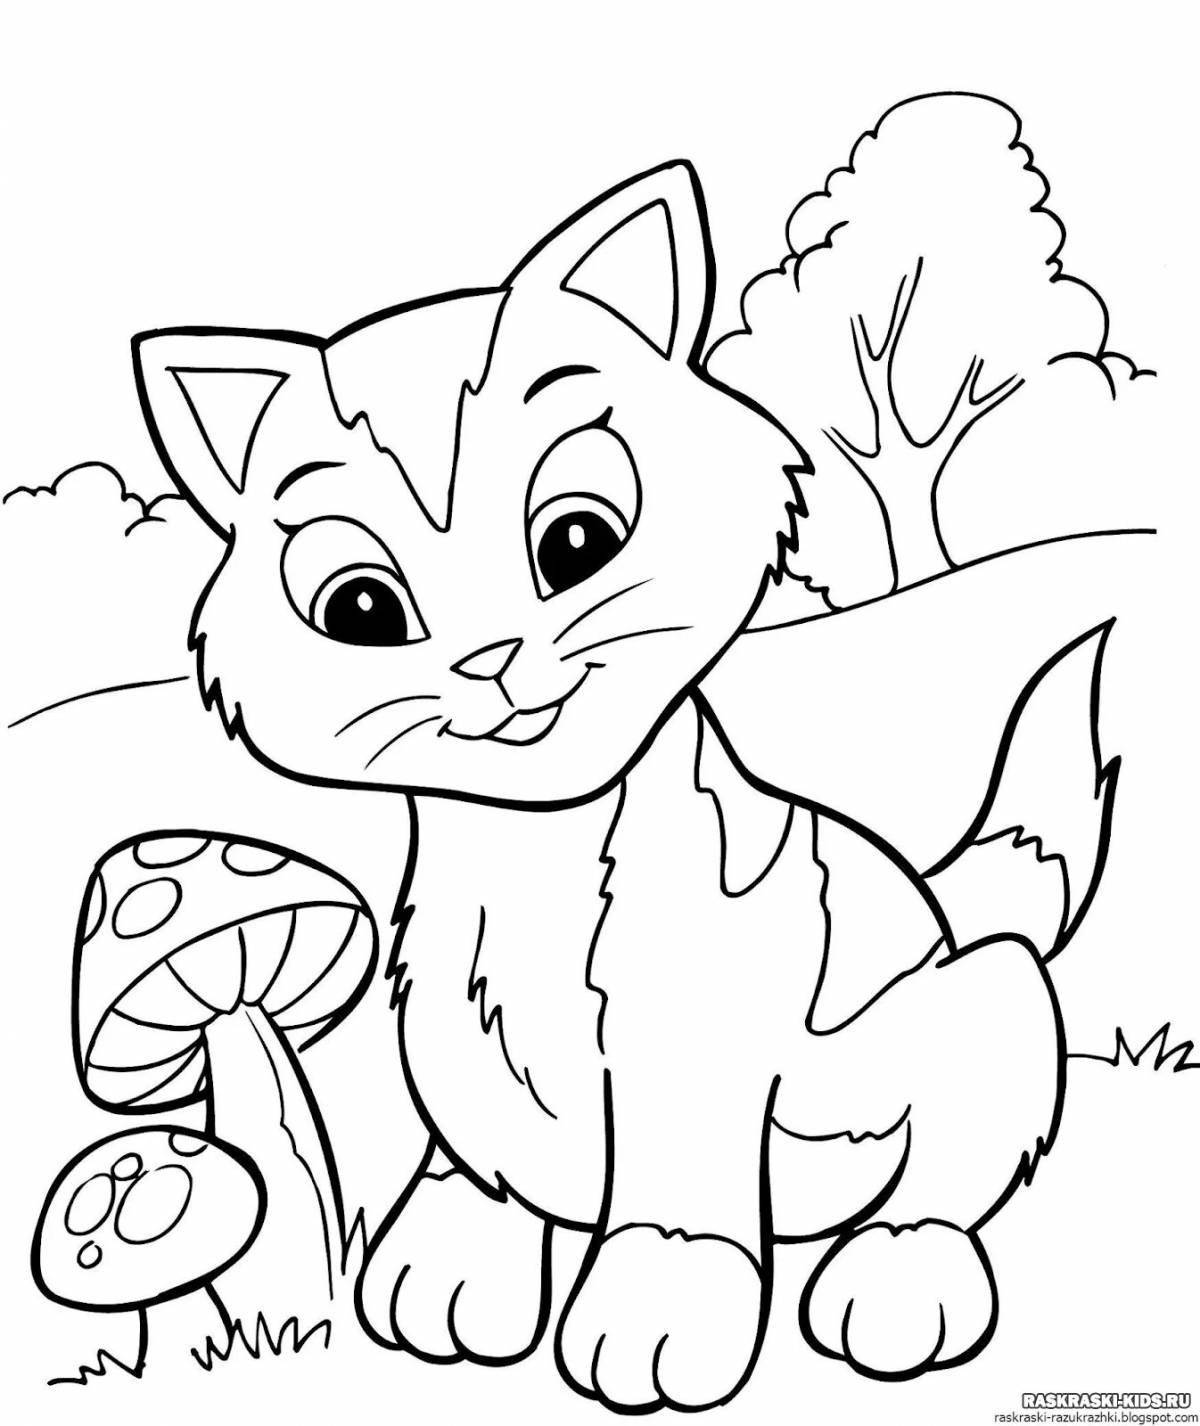 Coloring book for children 6-7 years old for girls animals